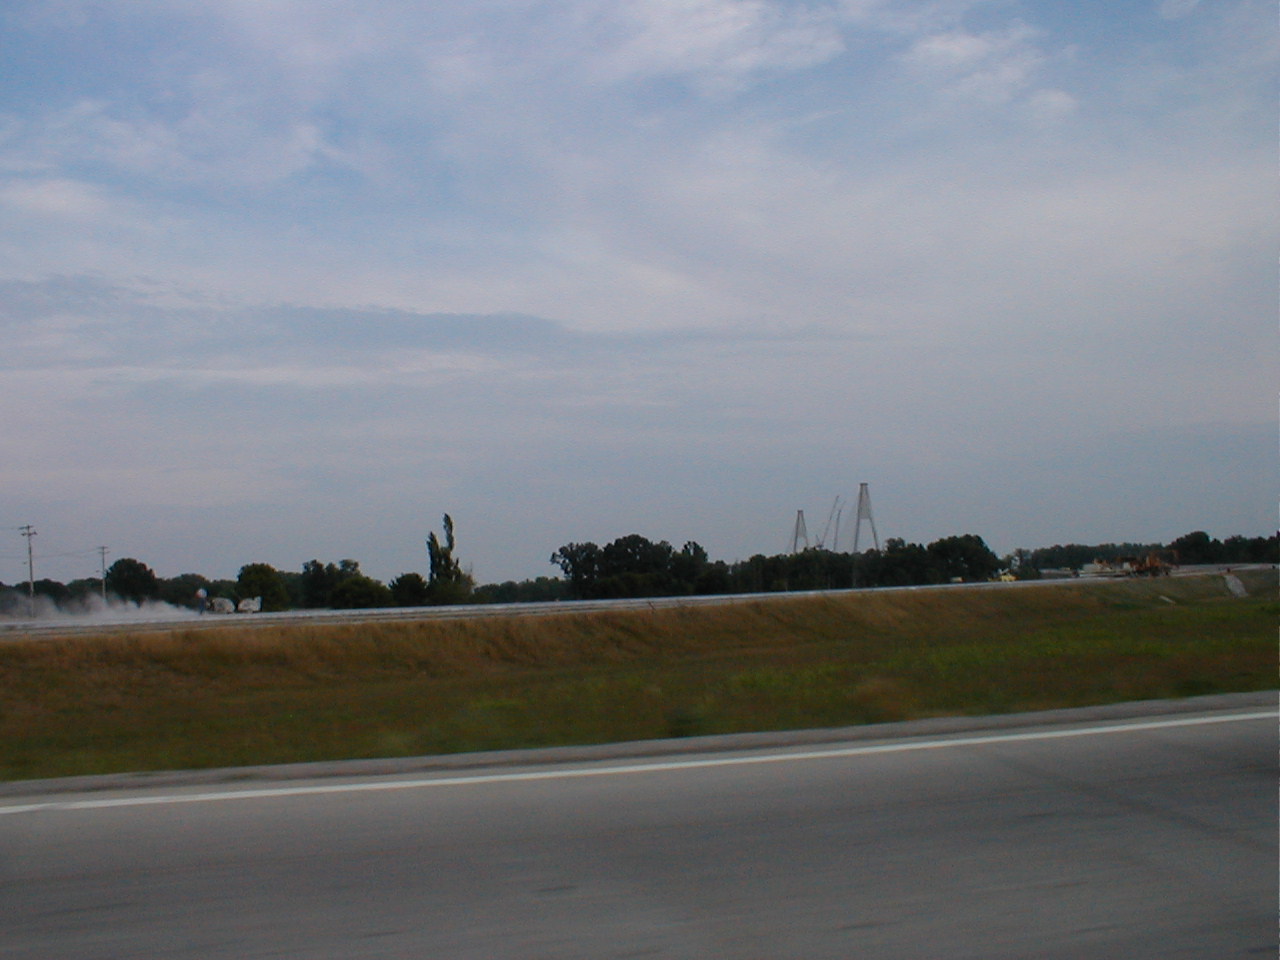 Construction on the Indiana approach.